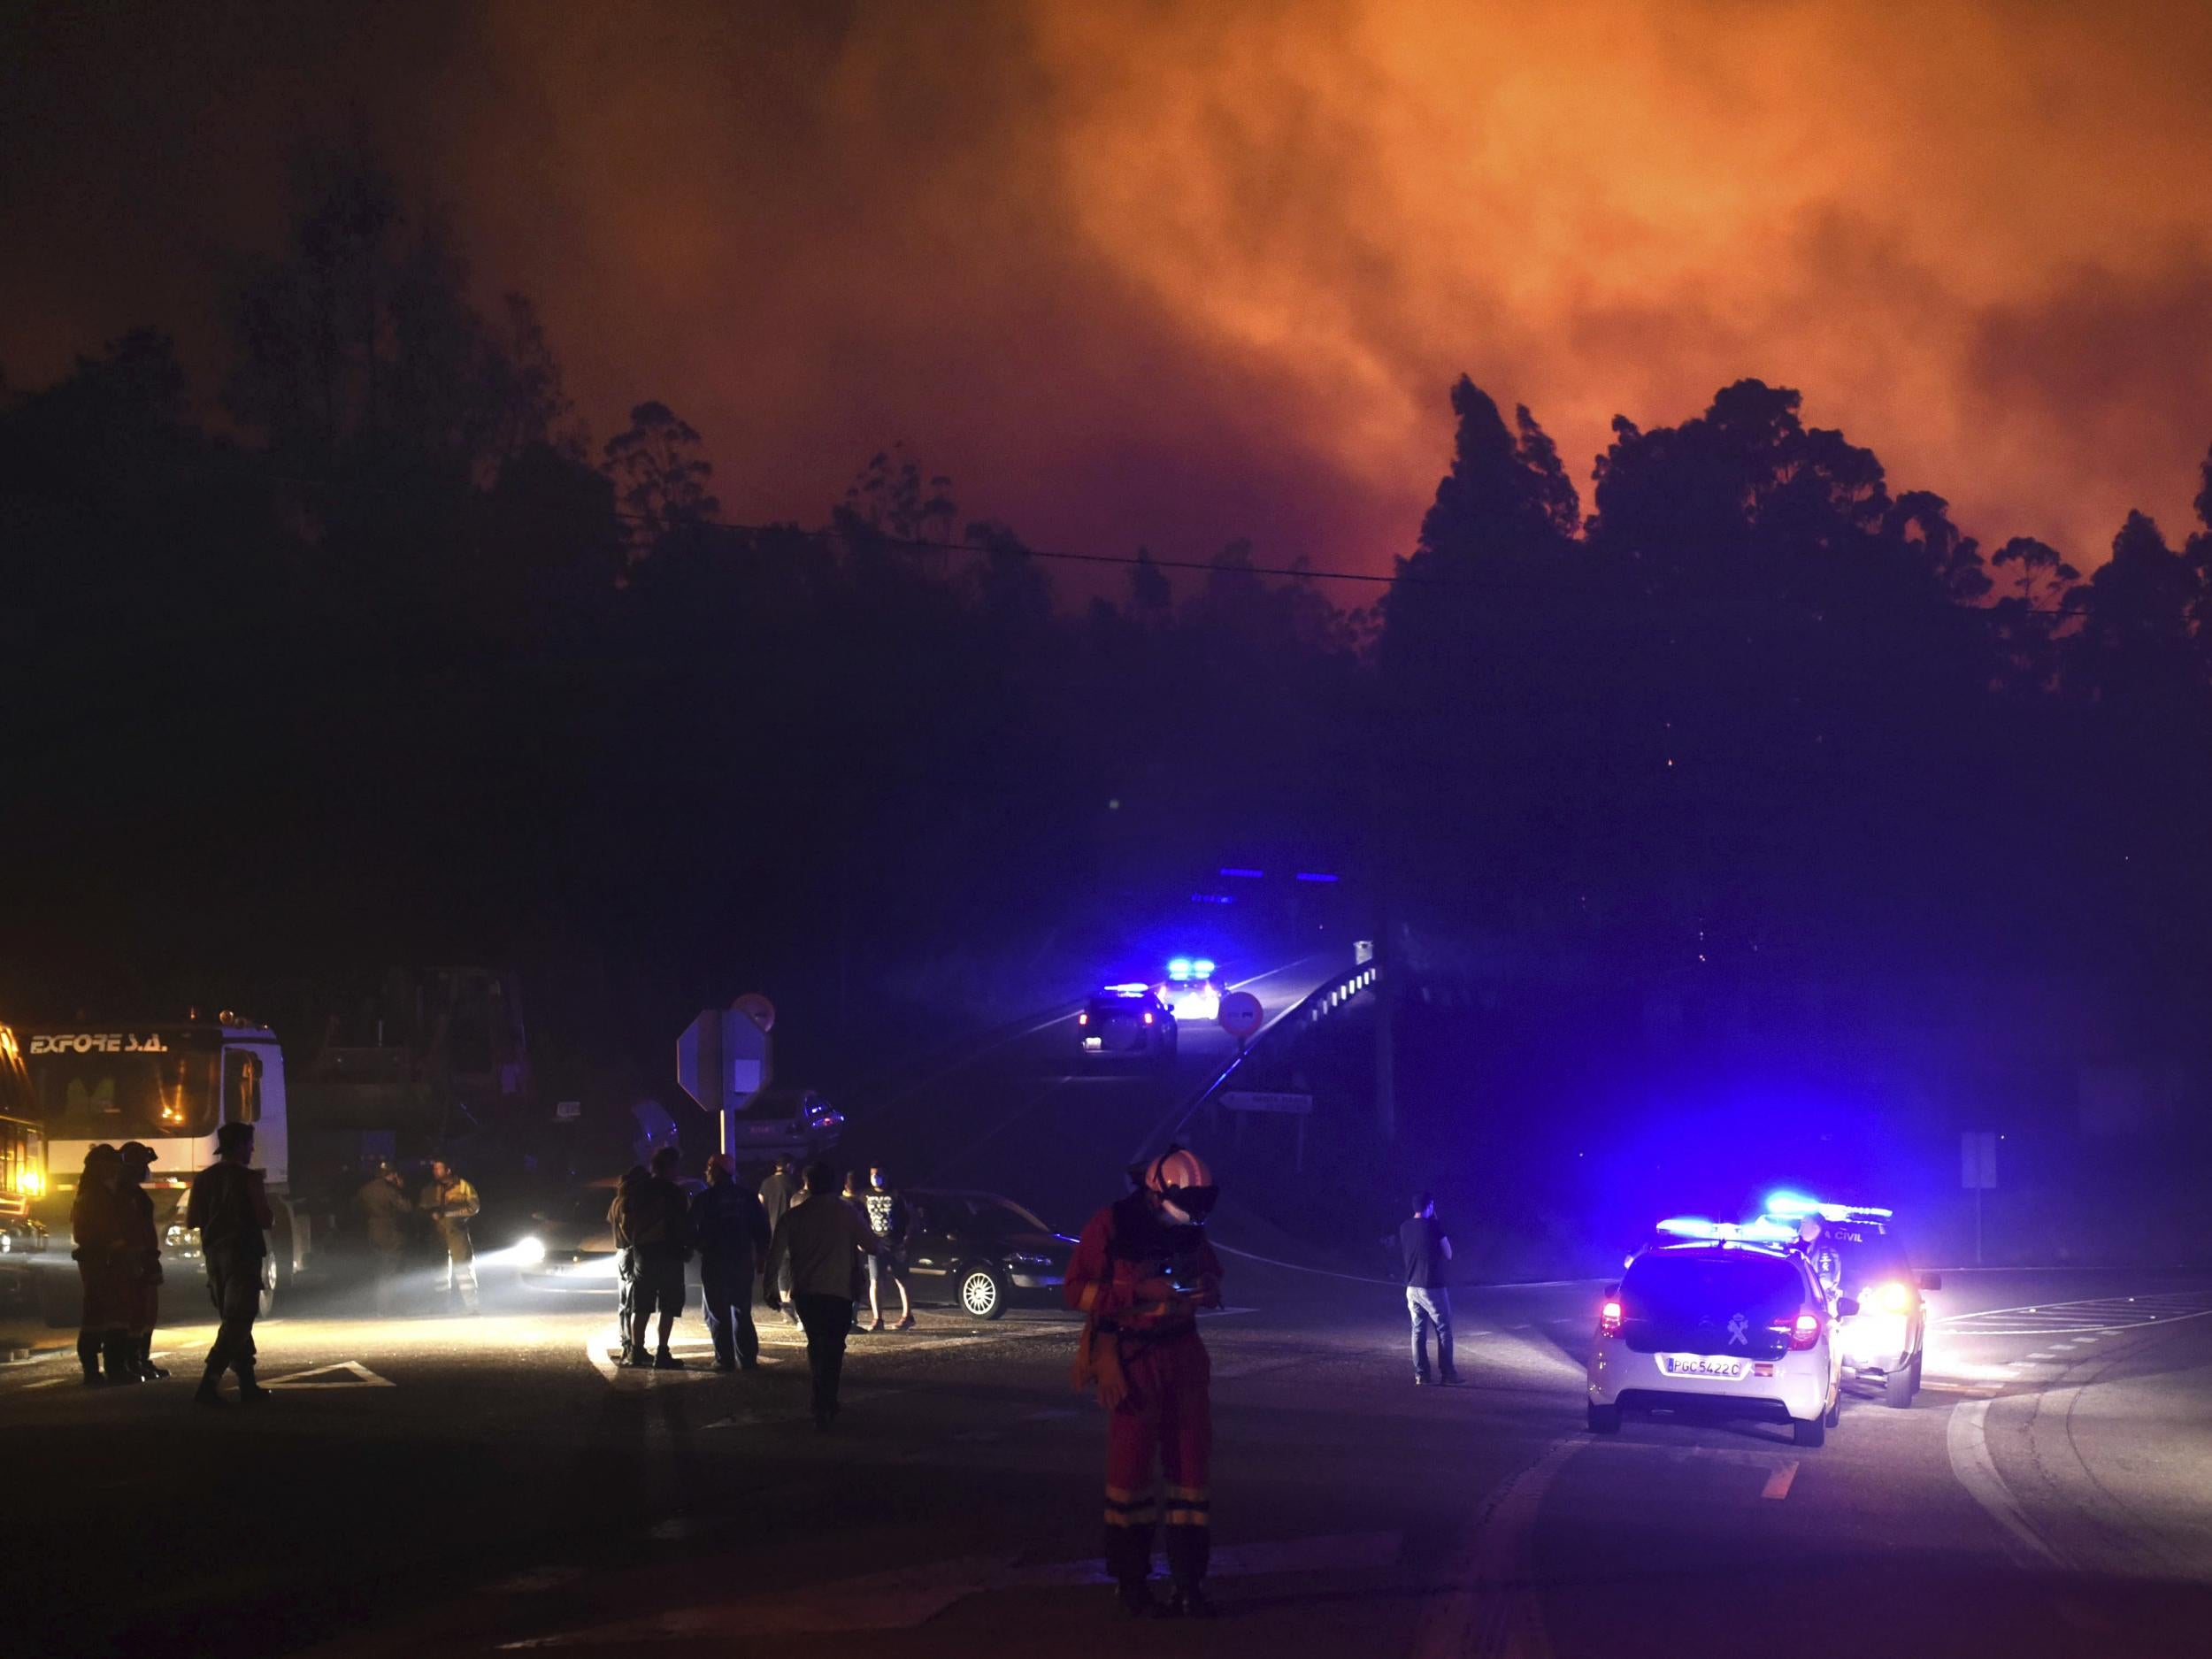 Police cars block the area as emergency vehicles responded to a fire in As Neves, Pontevedra, as wildfires grip the Iberian Peninsula